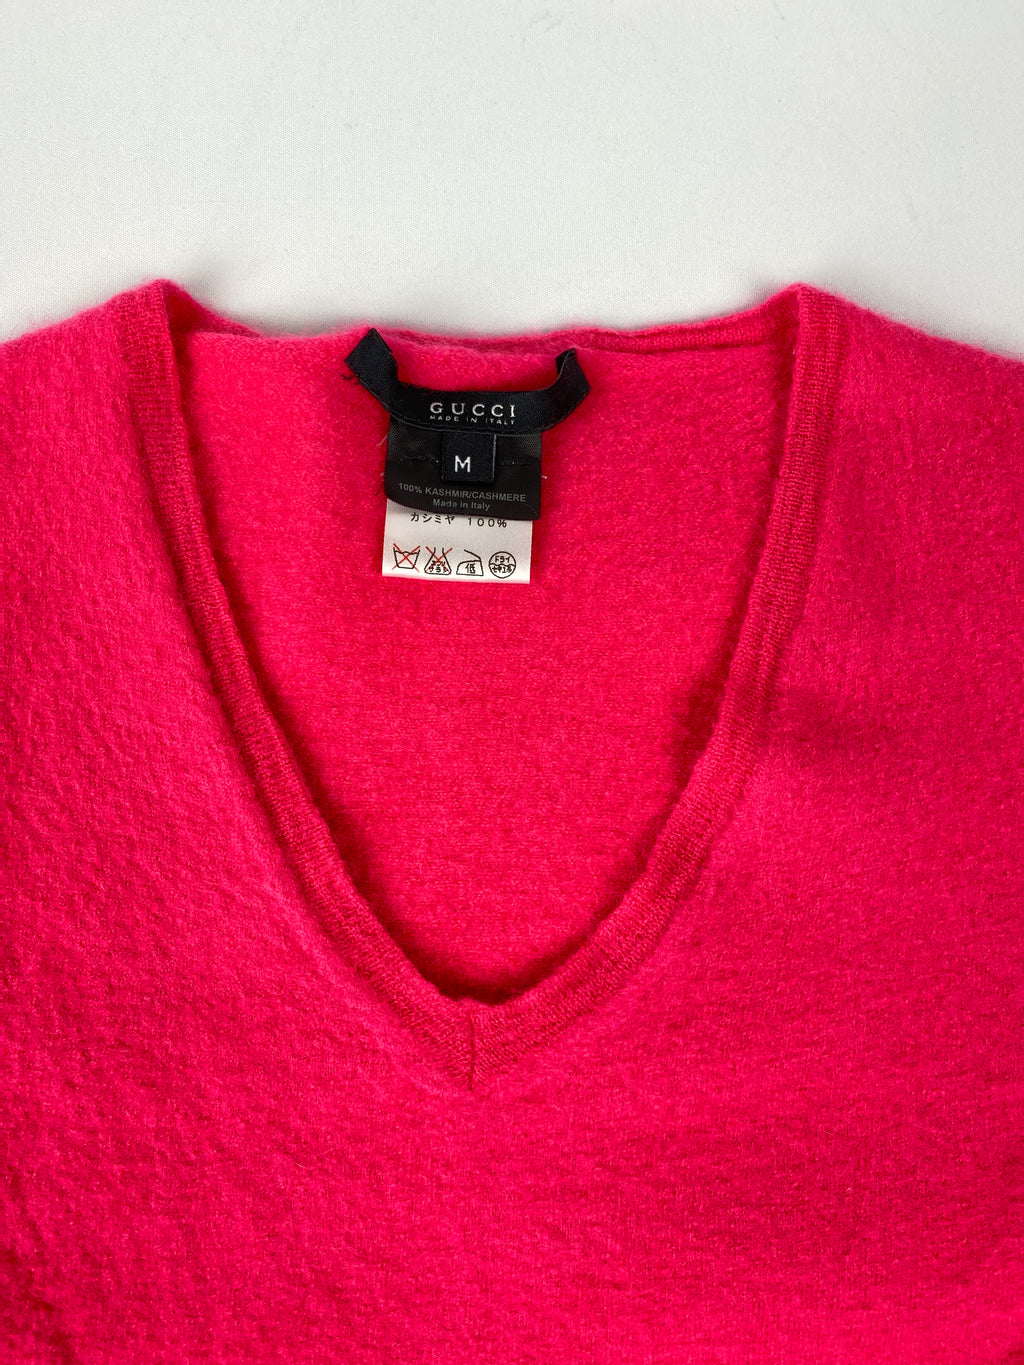 GUCCI -100% CASHMERE V NECK SWEATER IN BRIGHT PINK - SZ MED